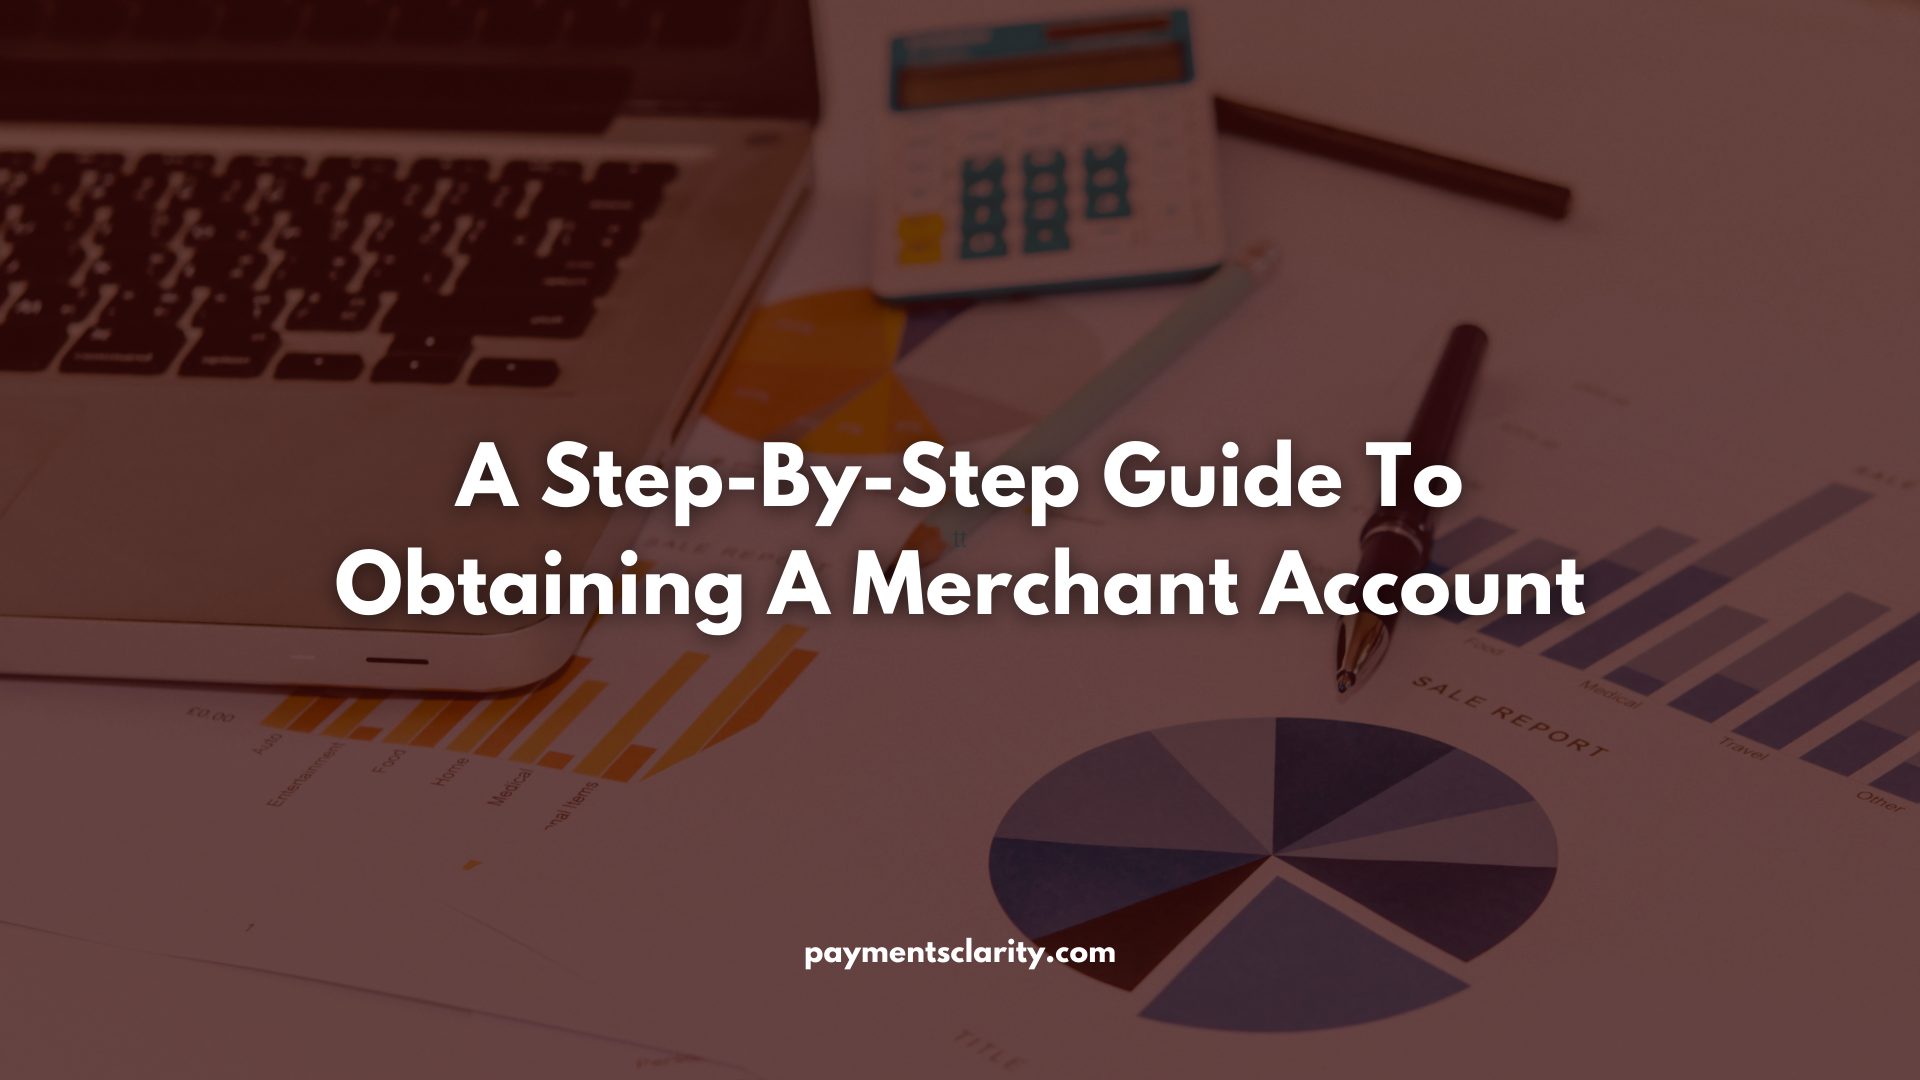 A Step-By-Step Guide To Obtaining A Merchant Account - Payments Clarity